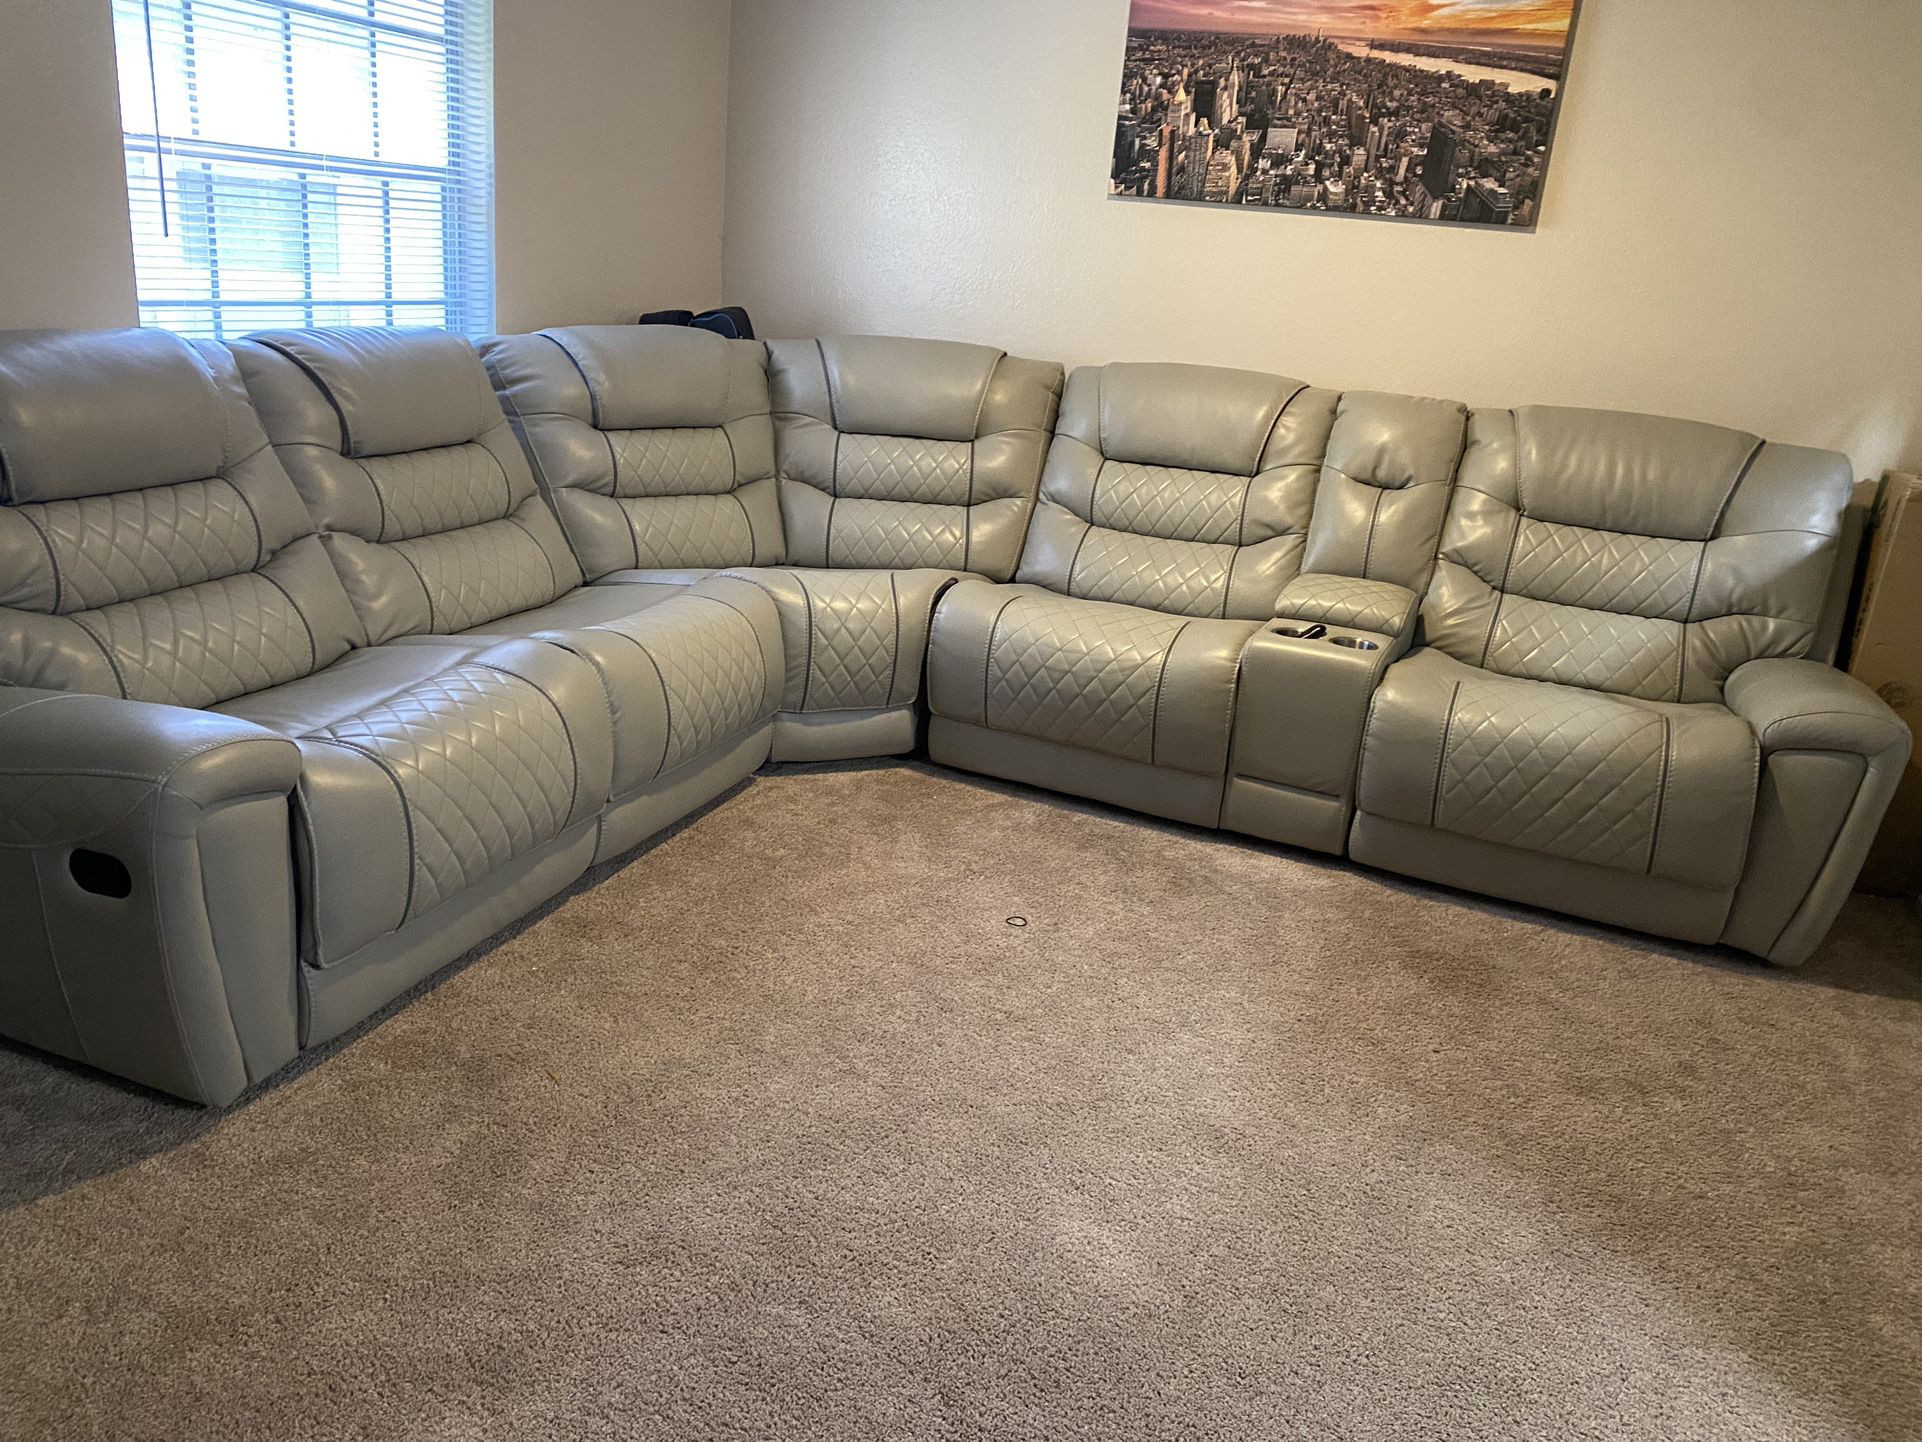 Grey Couch With 3 Recliners and Outlets In Middle Consult It’s a big sectional couch 